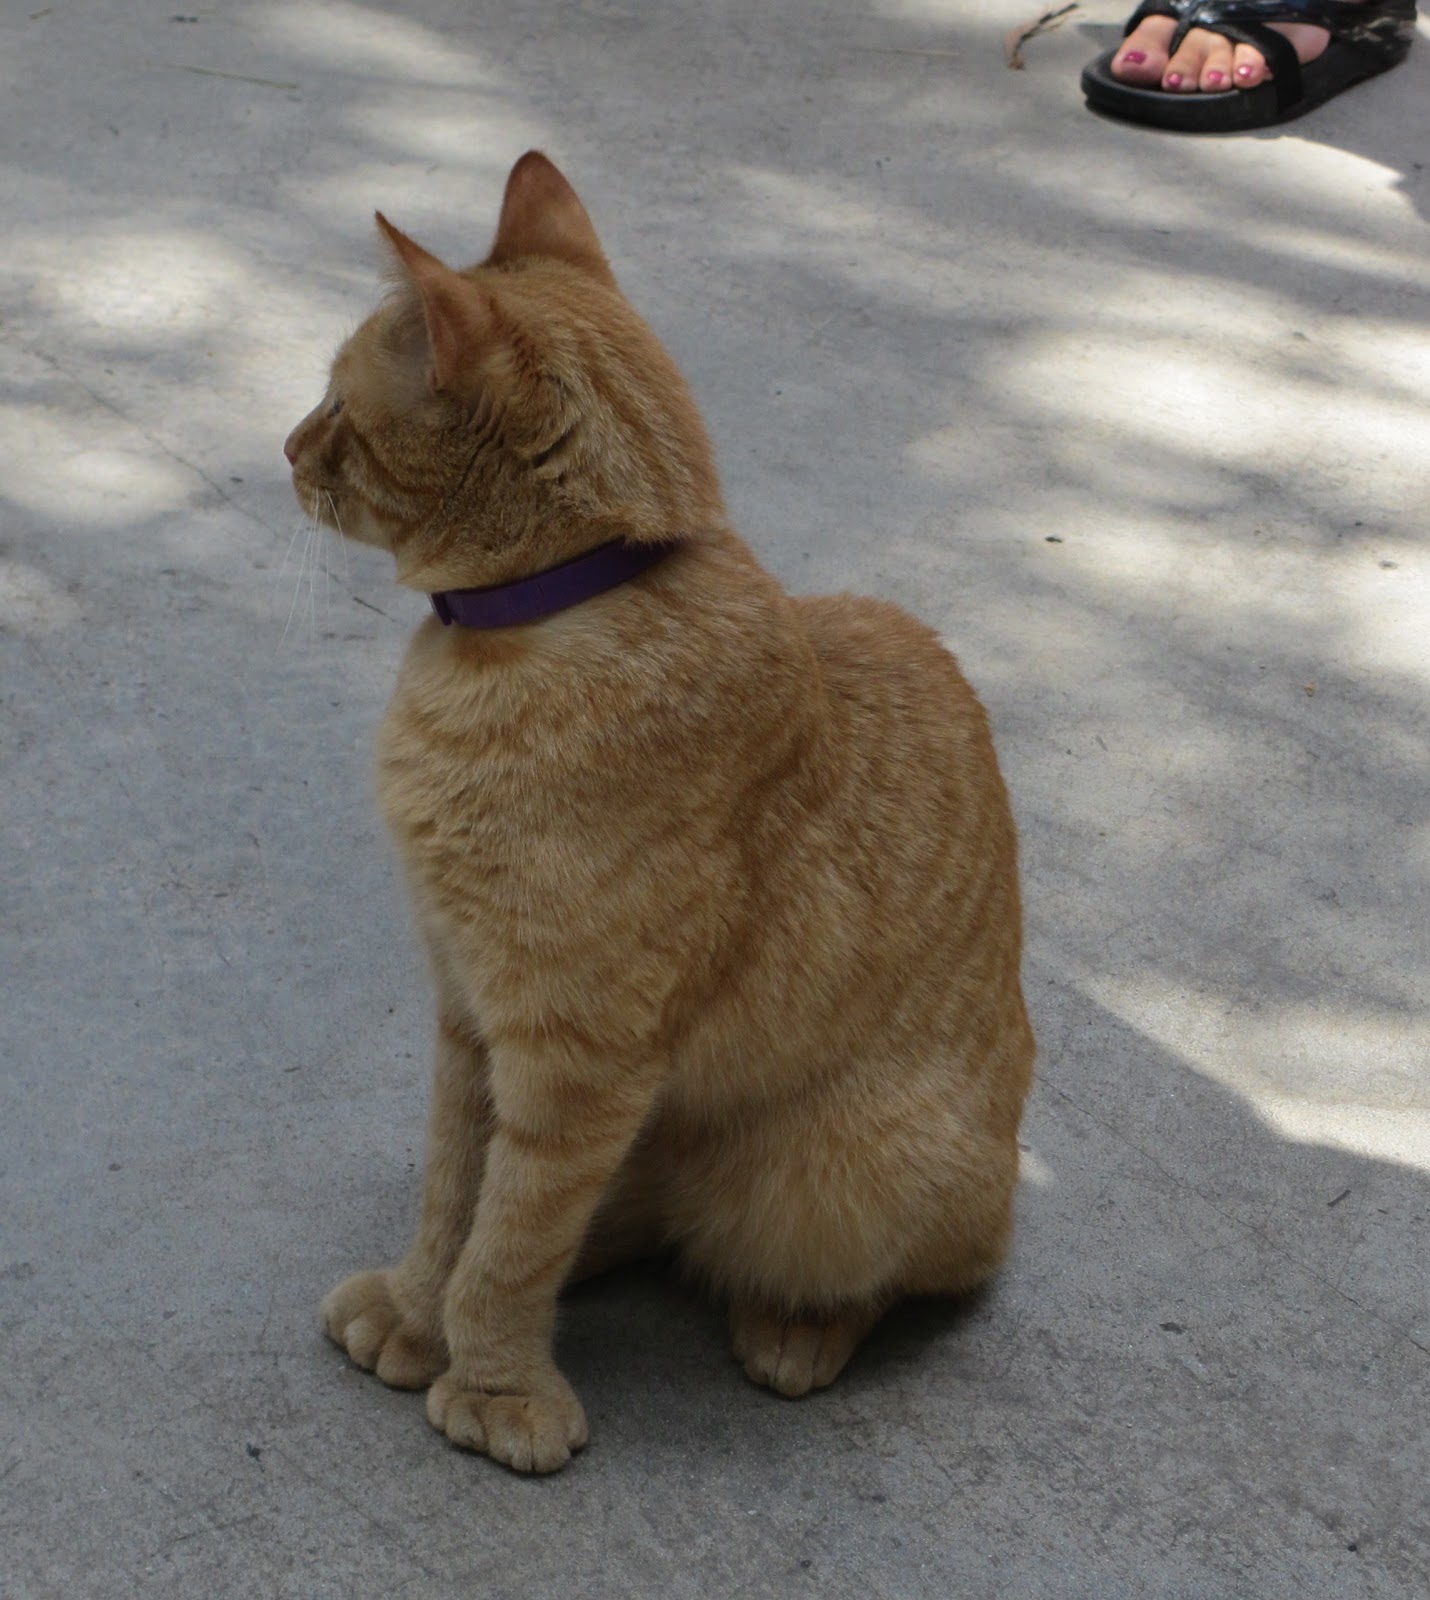 School For Us: Hemingway's Home and Cats! (Key West Excursion)